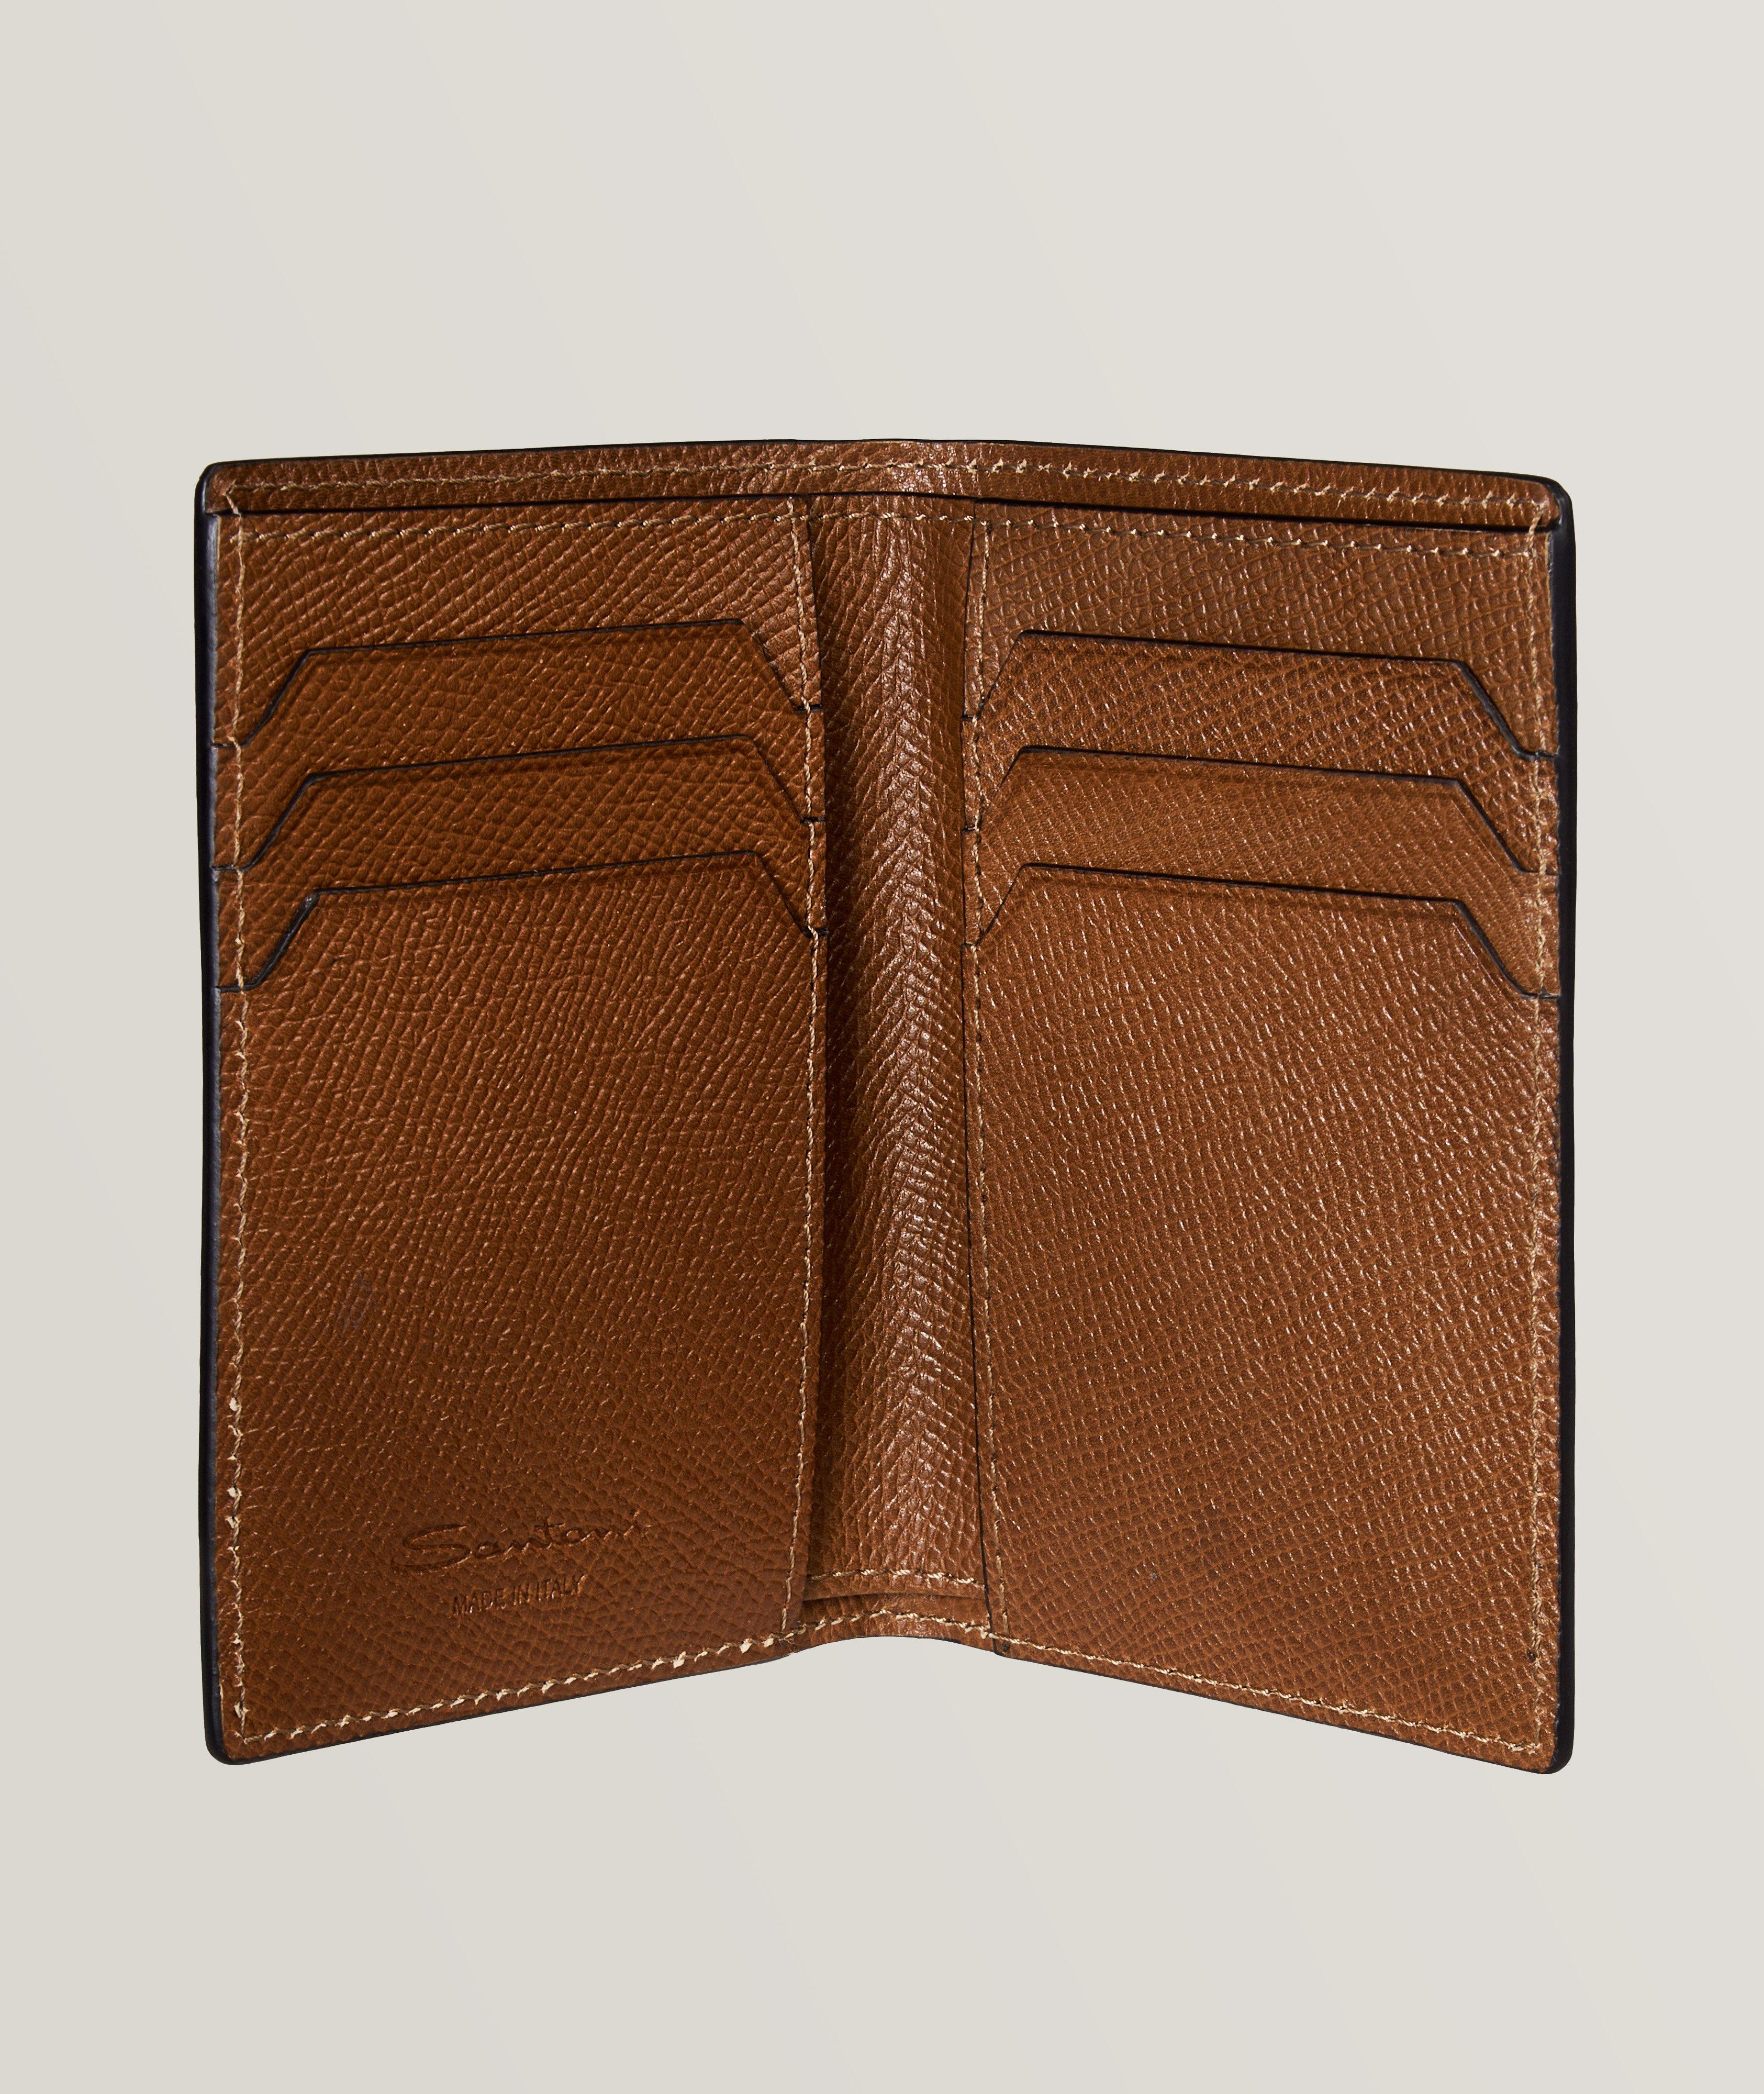 Air Burnished Grain Leather Vertical Card Case image 1